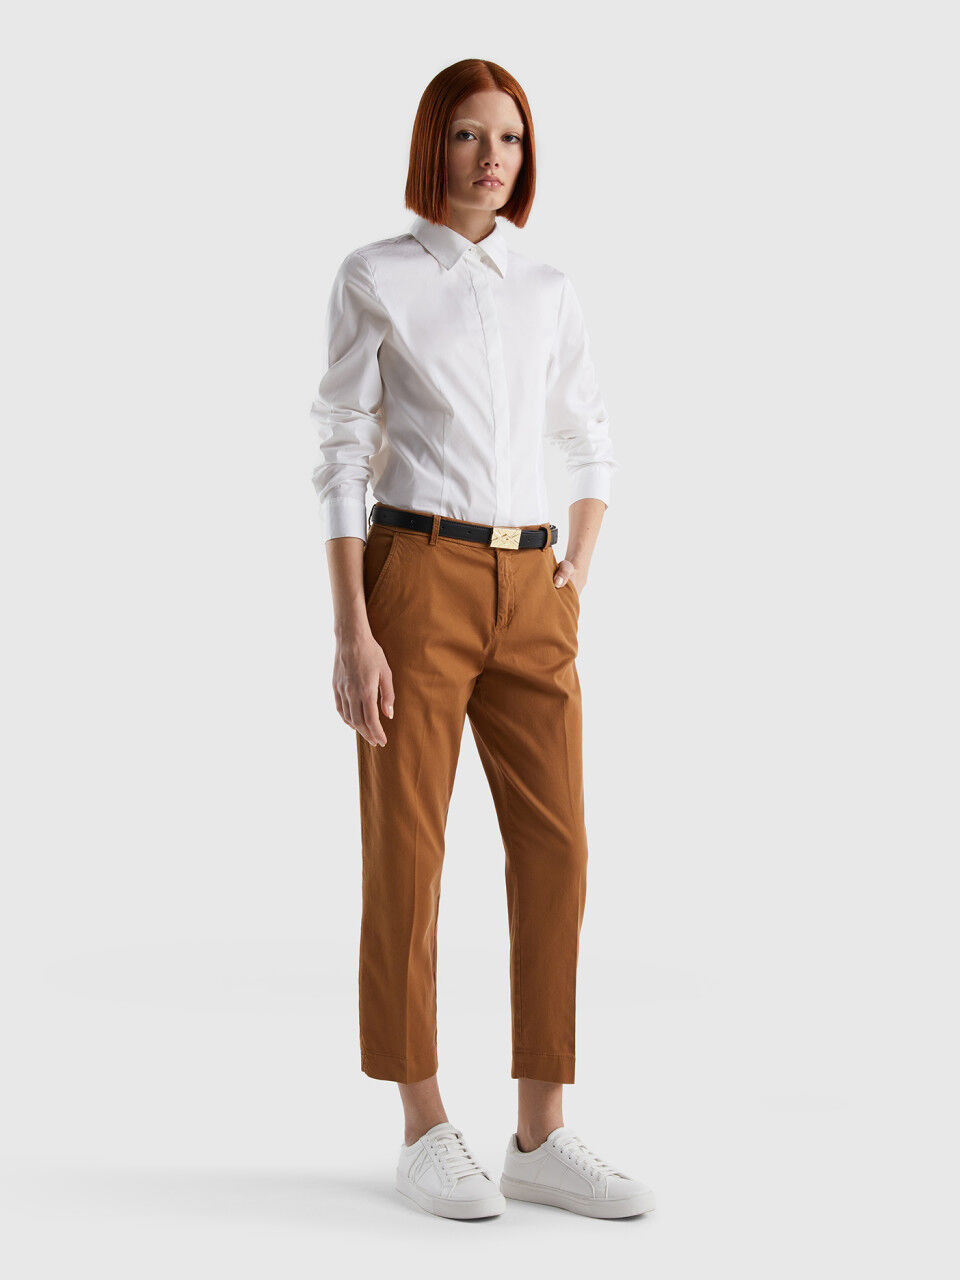 Perfect Chinos | Women's Chinos | Chino Pants For Women – Liam & Company